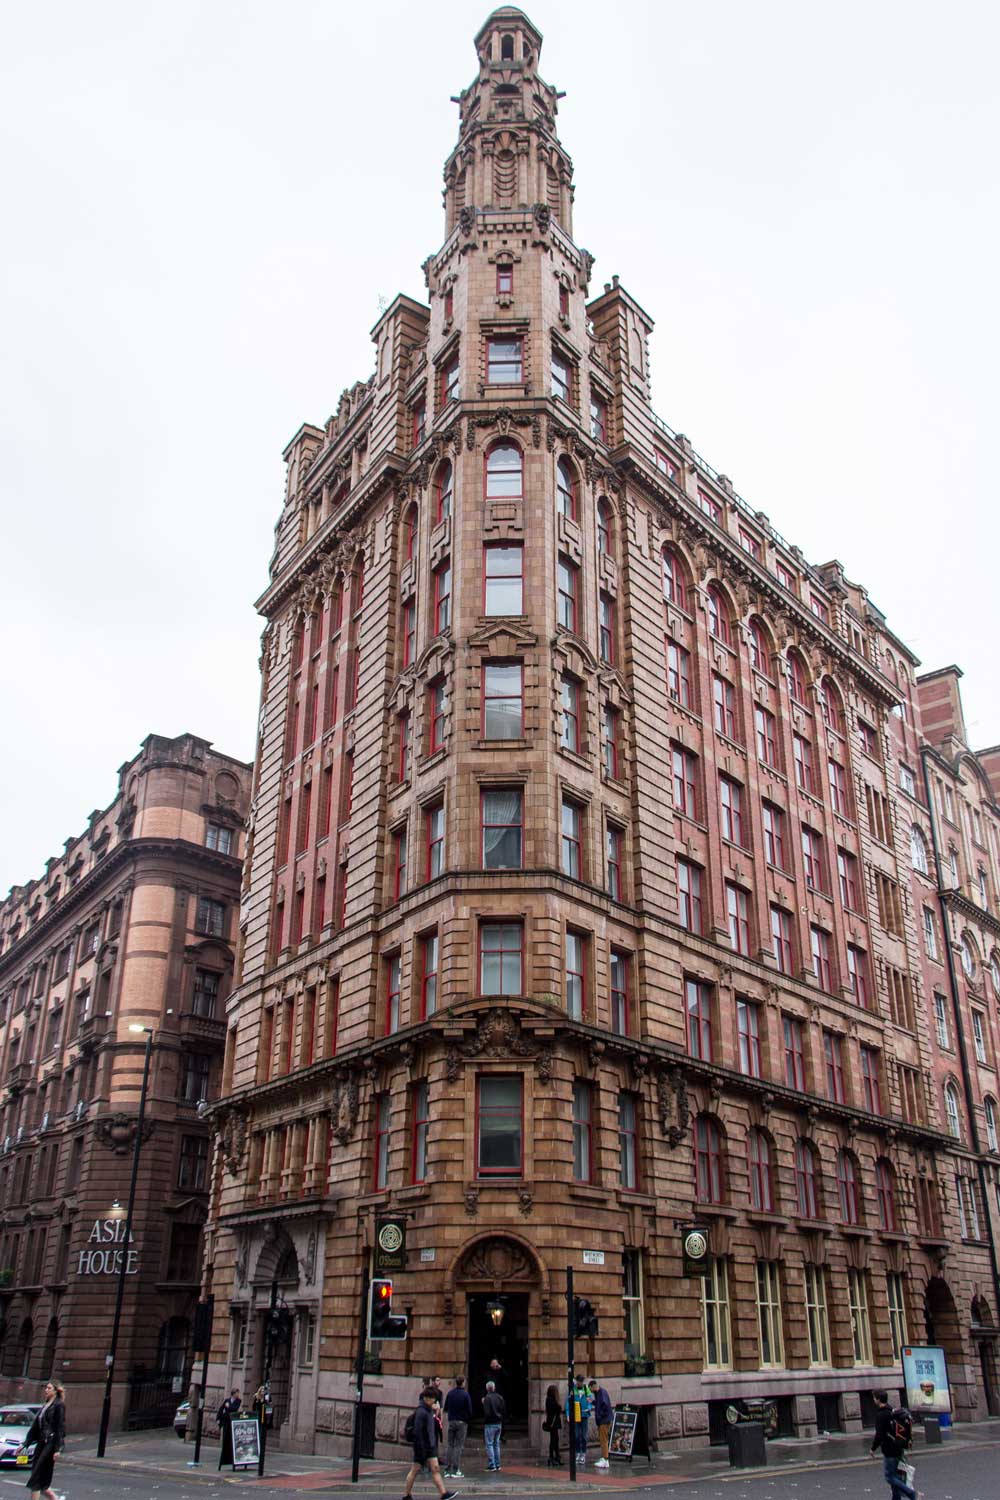 An old red brick textiles warehouse in Manchester 